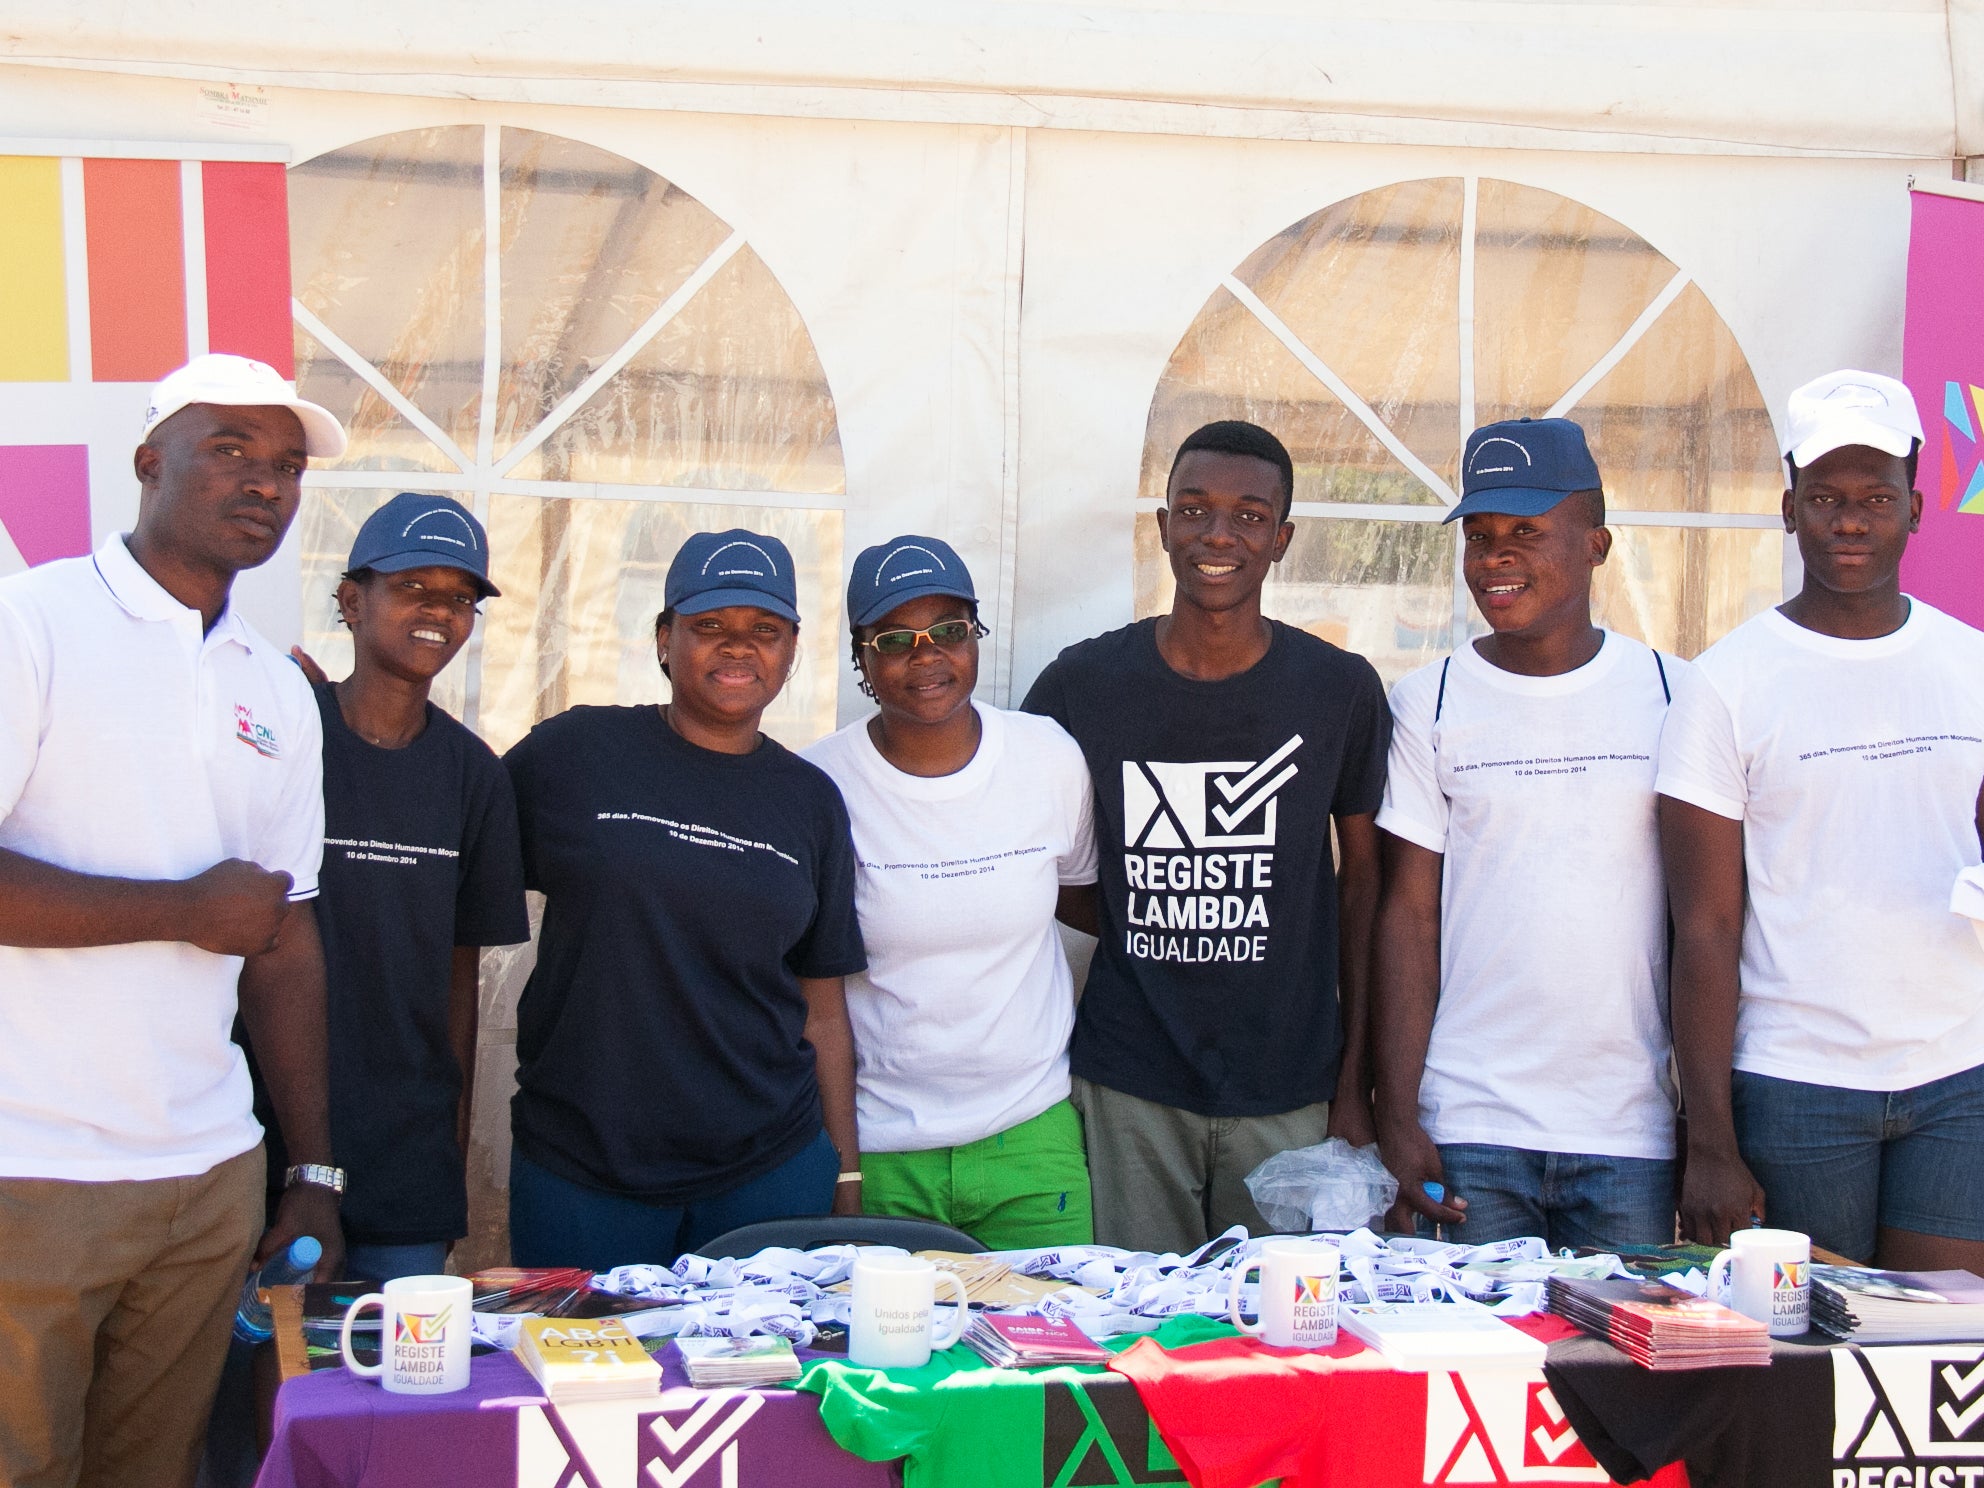 LAMBDA are the only LGBT organisation in Mozambique